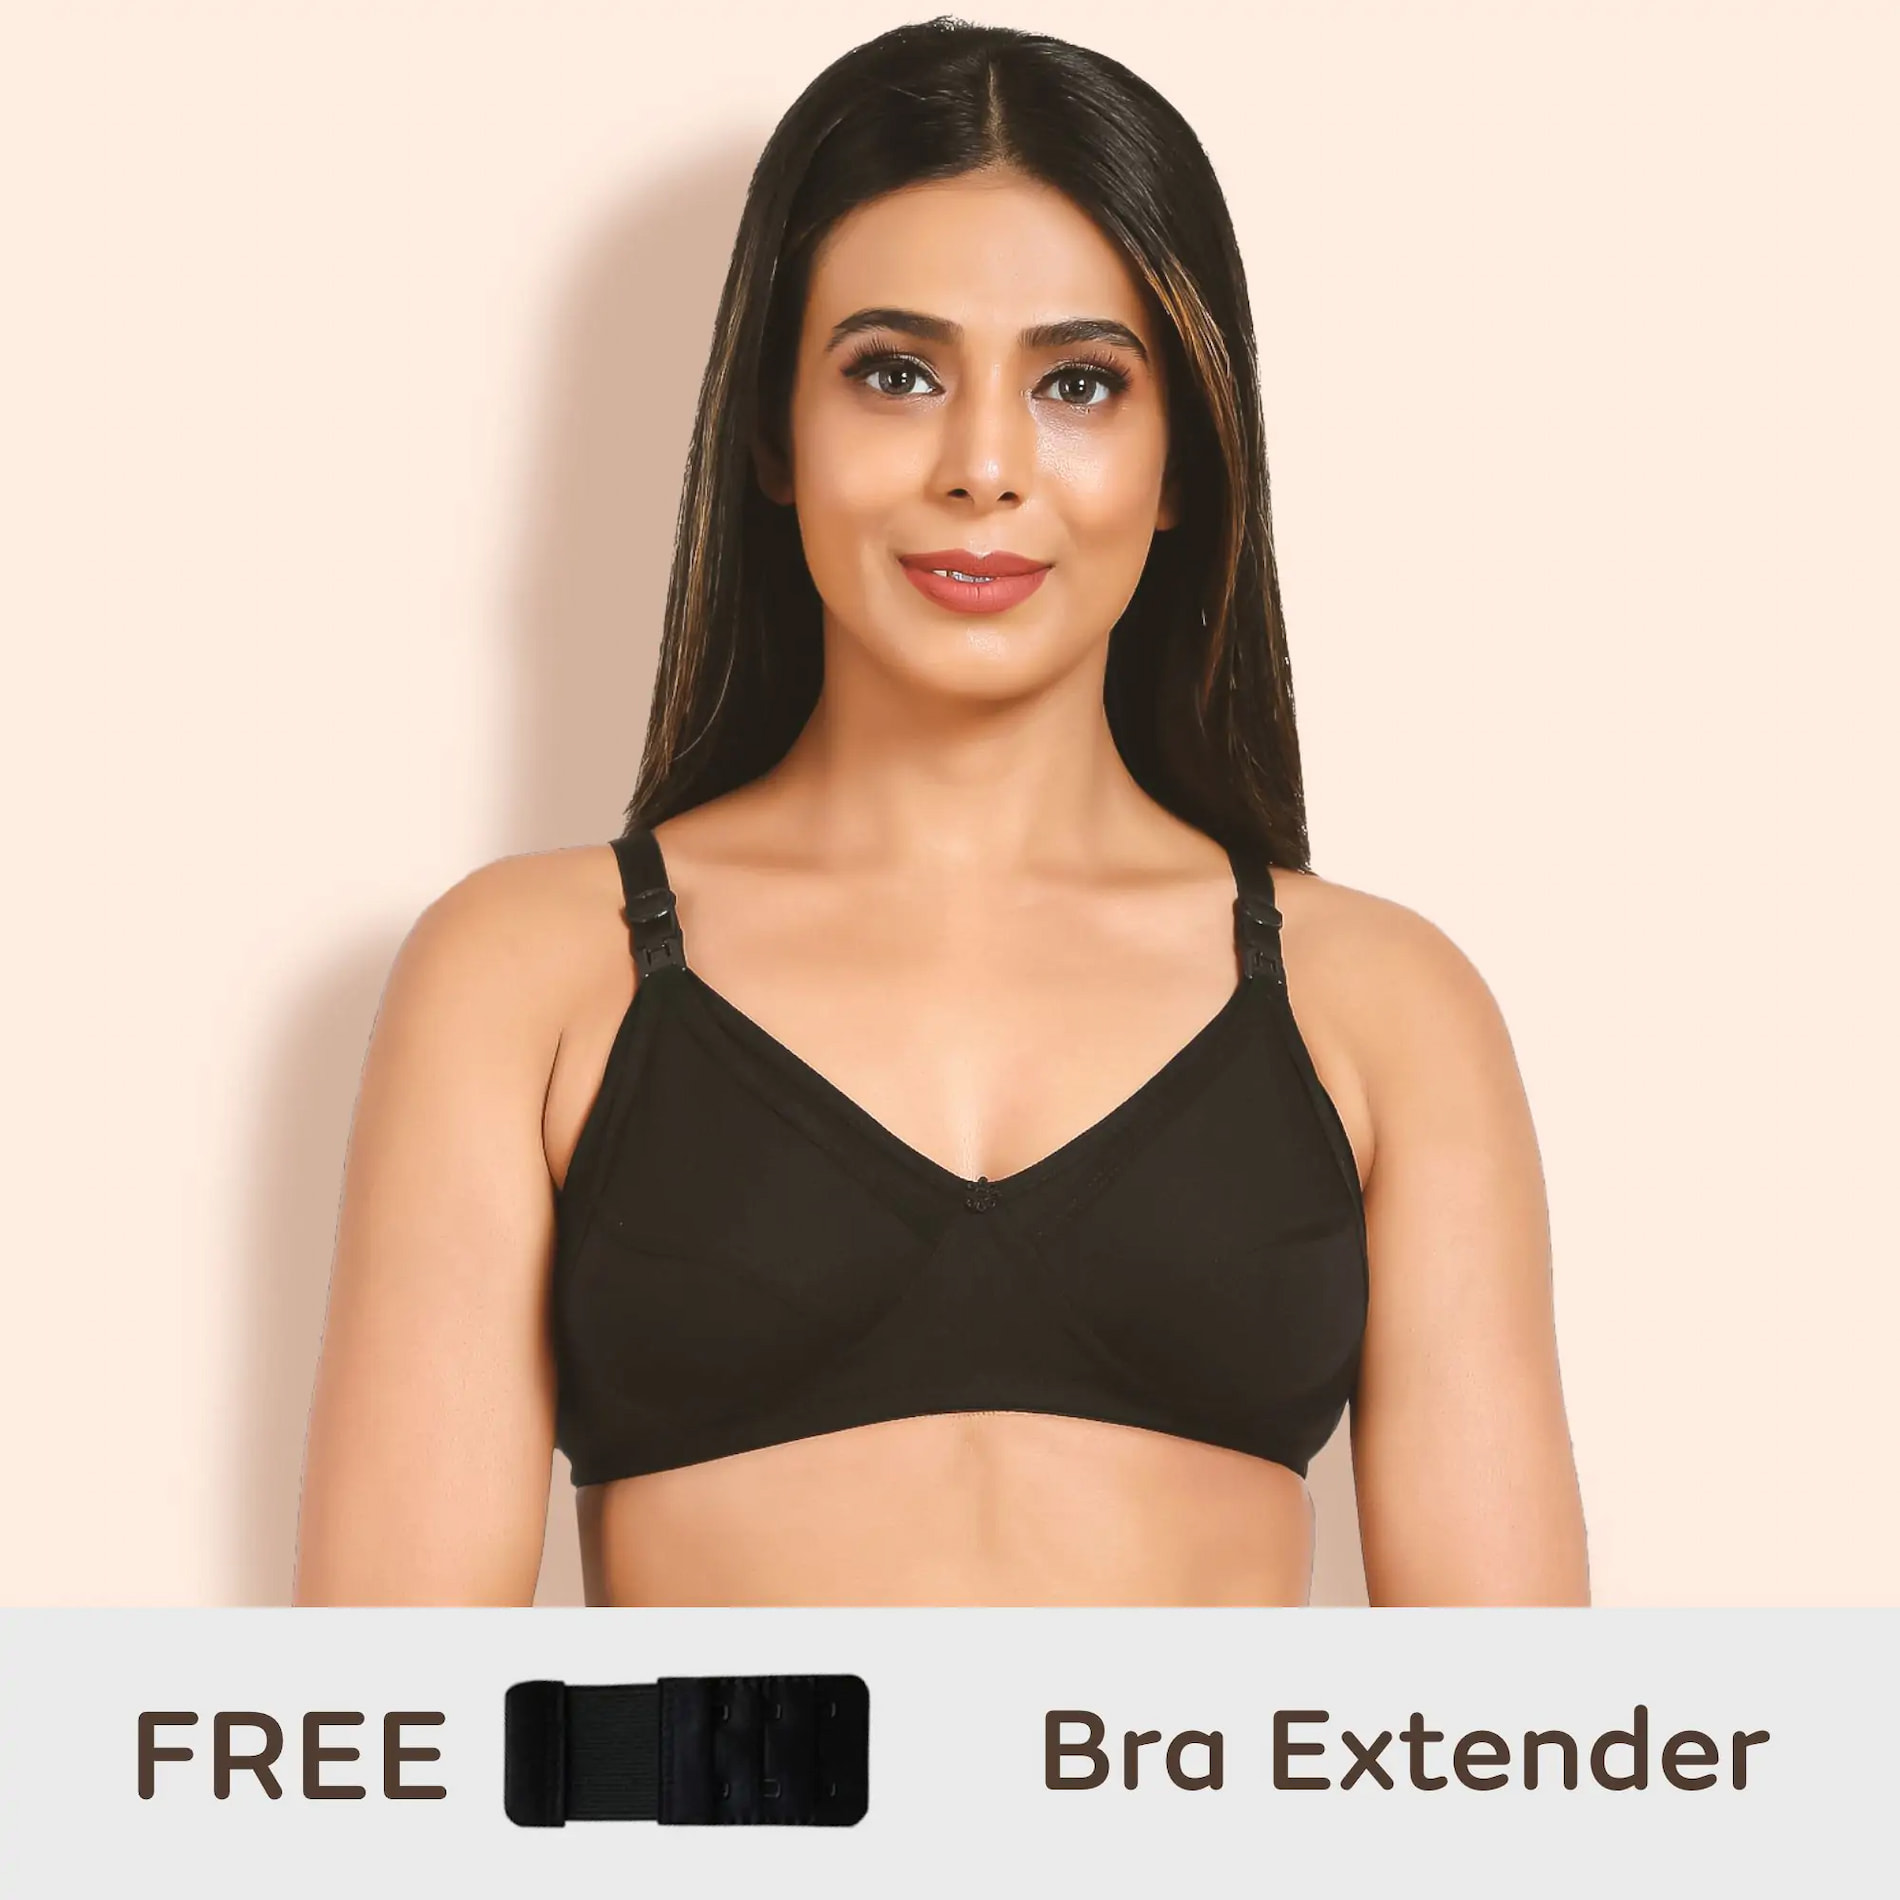 Maternity/Nursing Bras Non-Wired, Non-Padded with free Bra Extender – Classic Black 32 B 